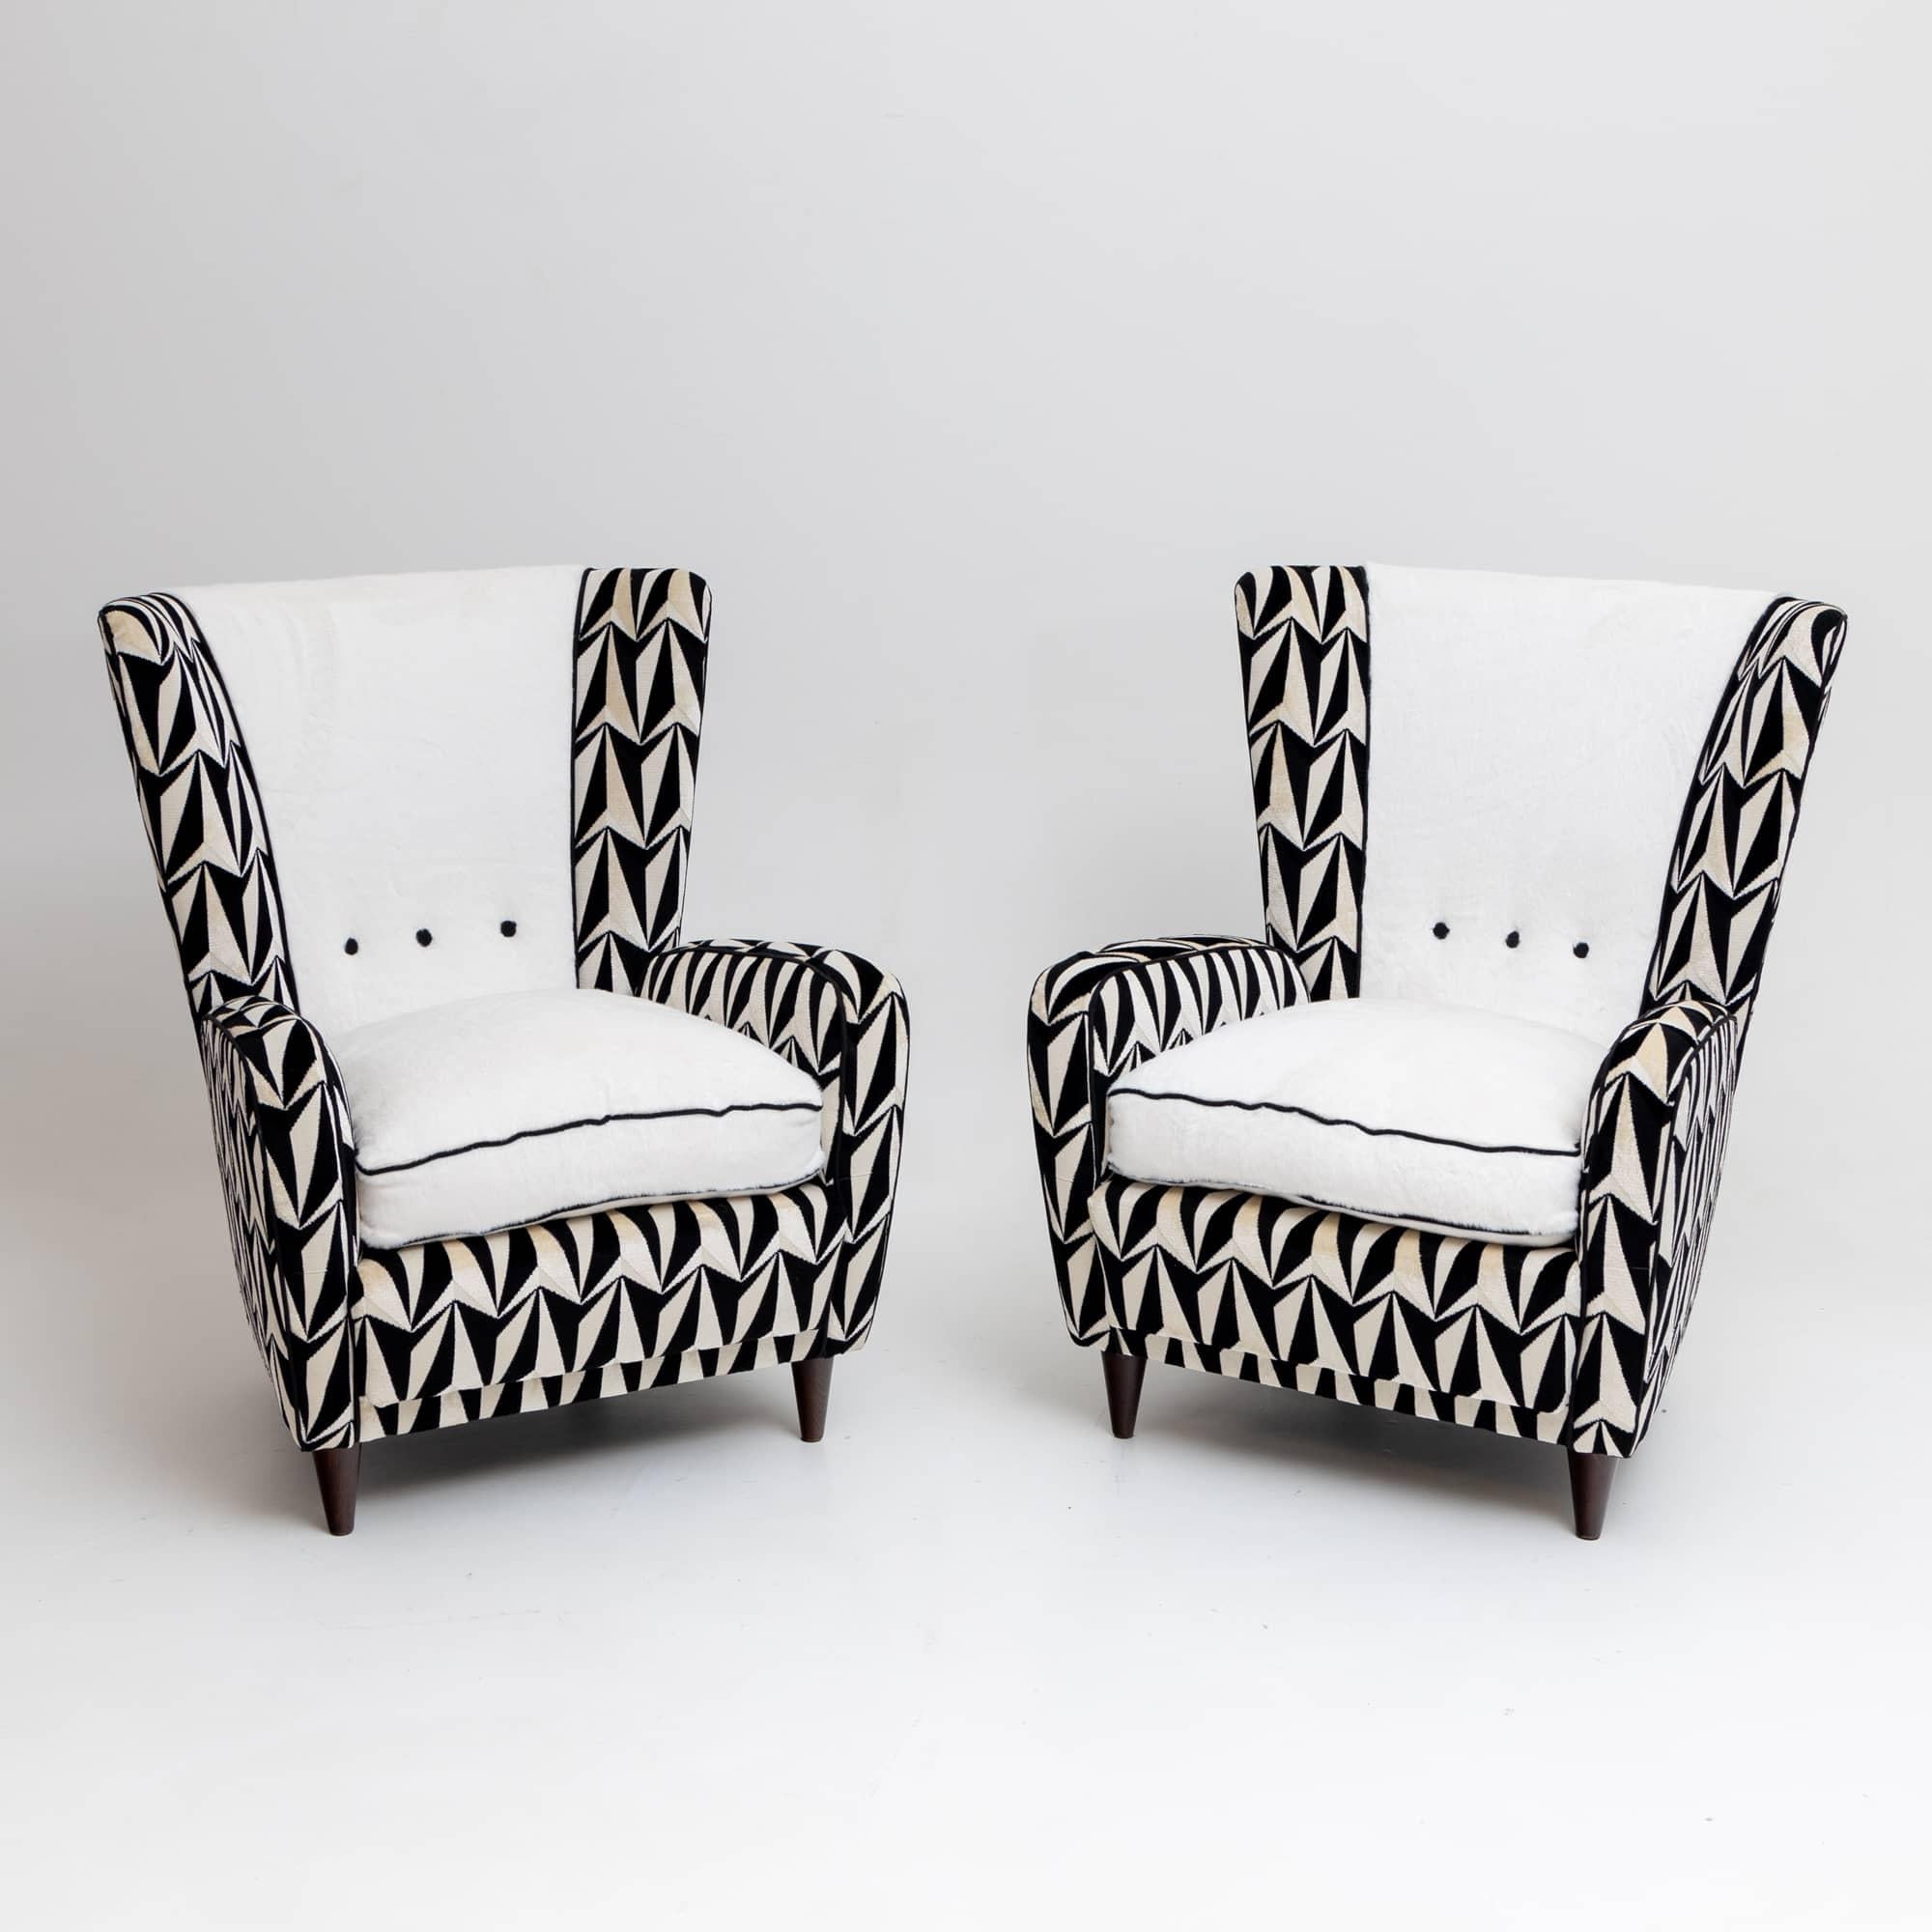 Modern Pair of Lounge Chairs, Italian Manufacture, Mid-20th Century For Sale